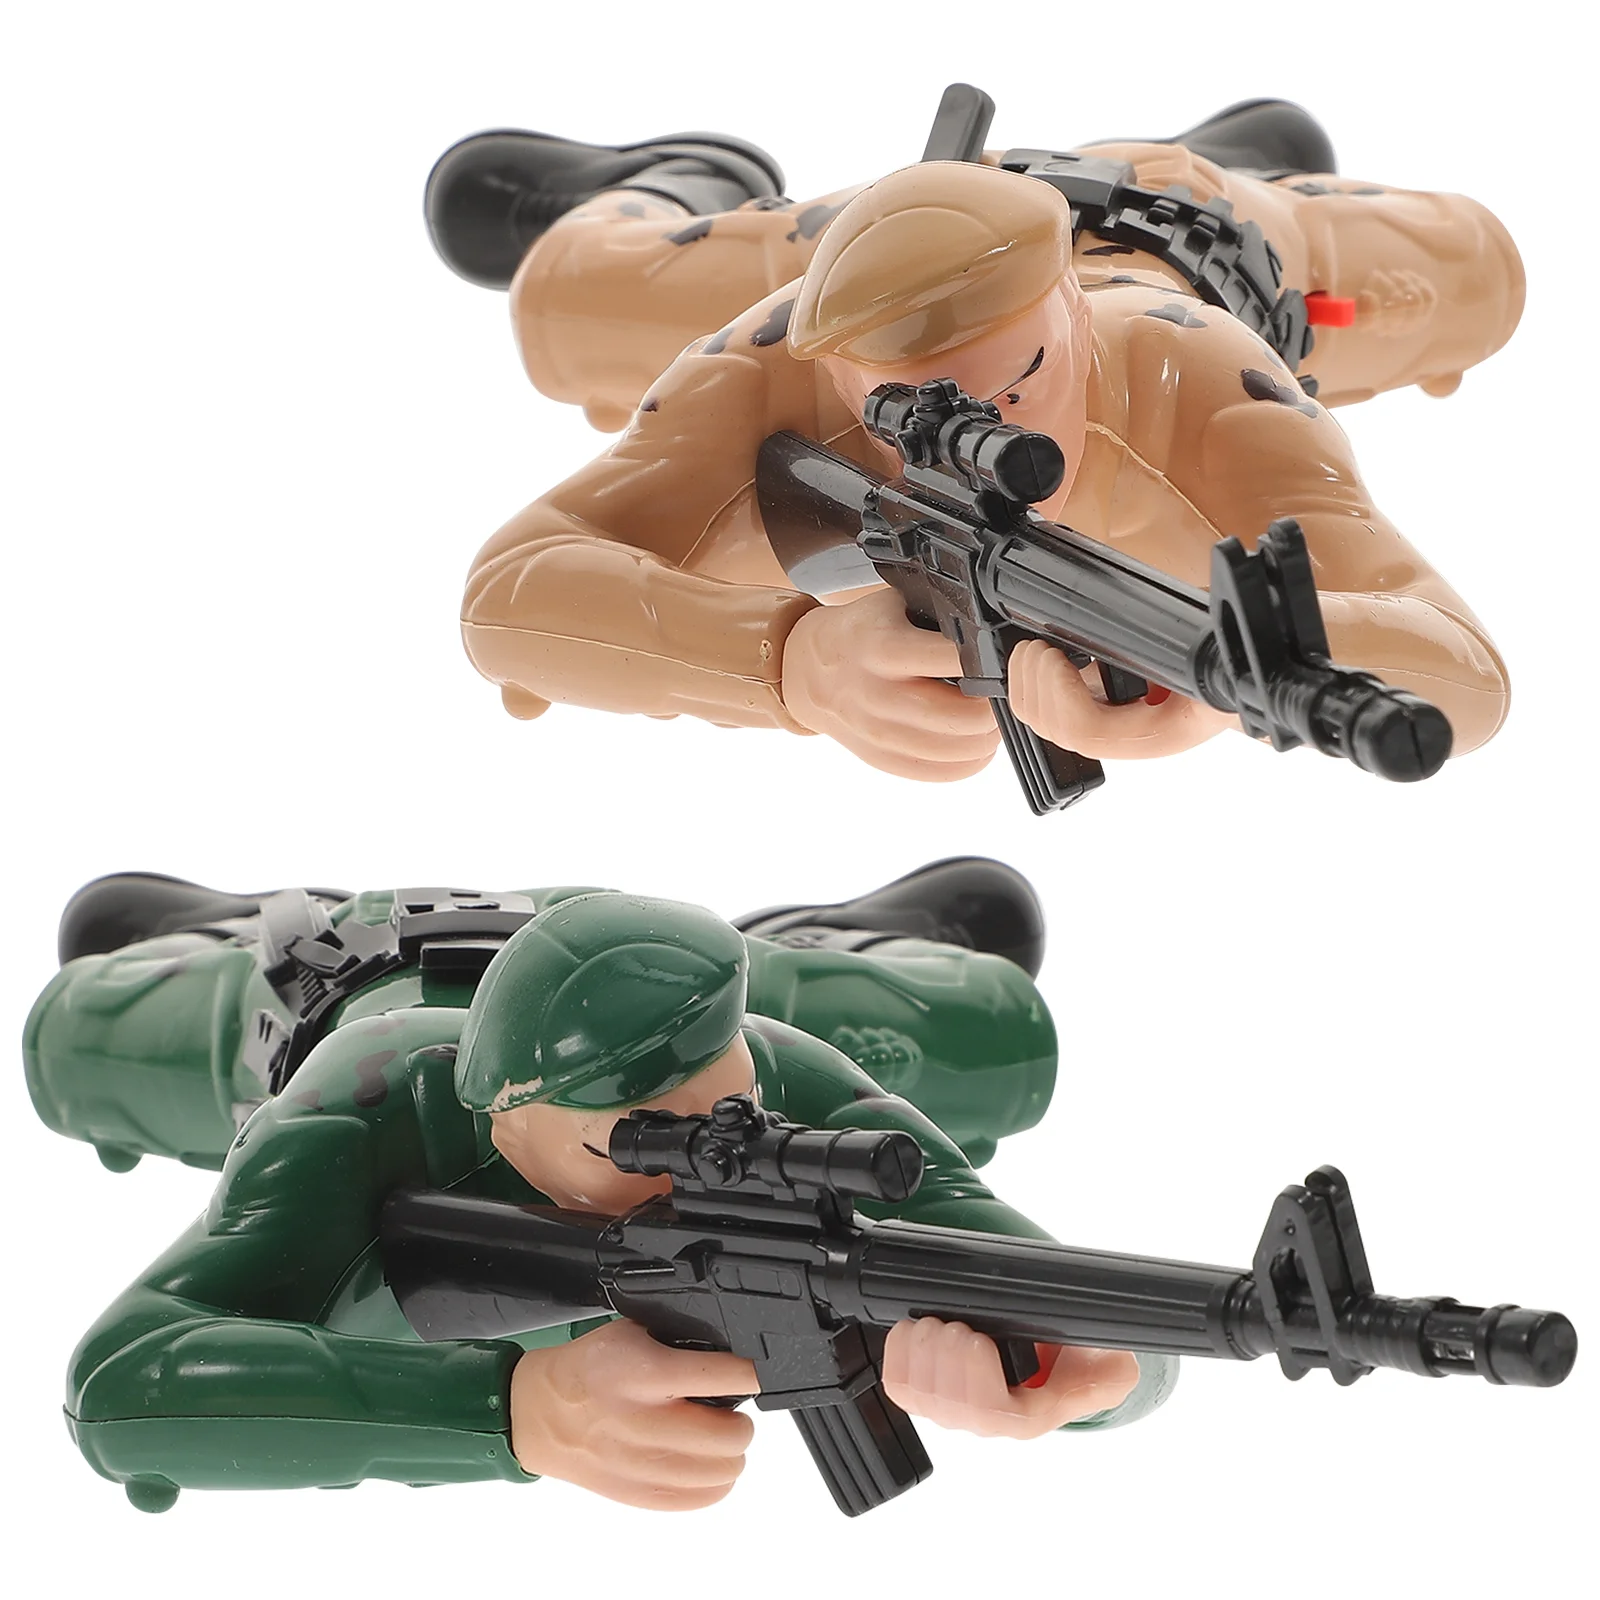 

2 Pcs Soldier Toy Figurine Playset Childrens Toys Electric Crawling Soldiers Statue